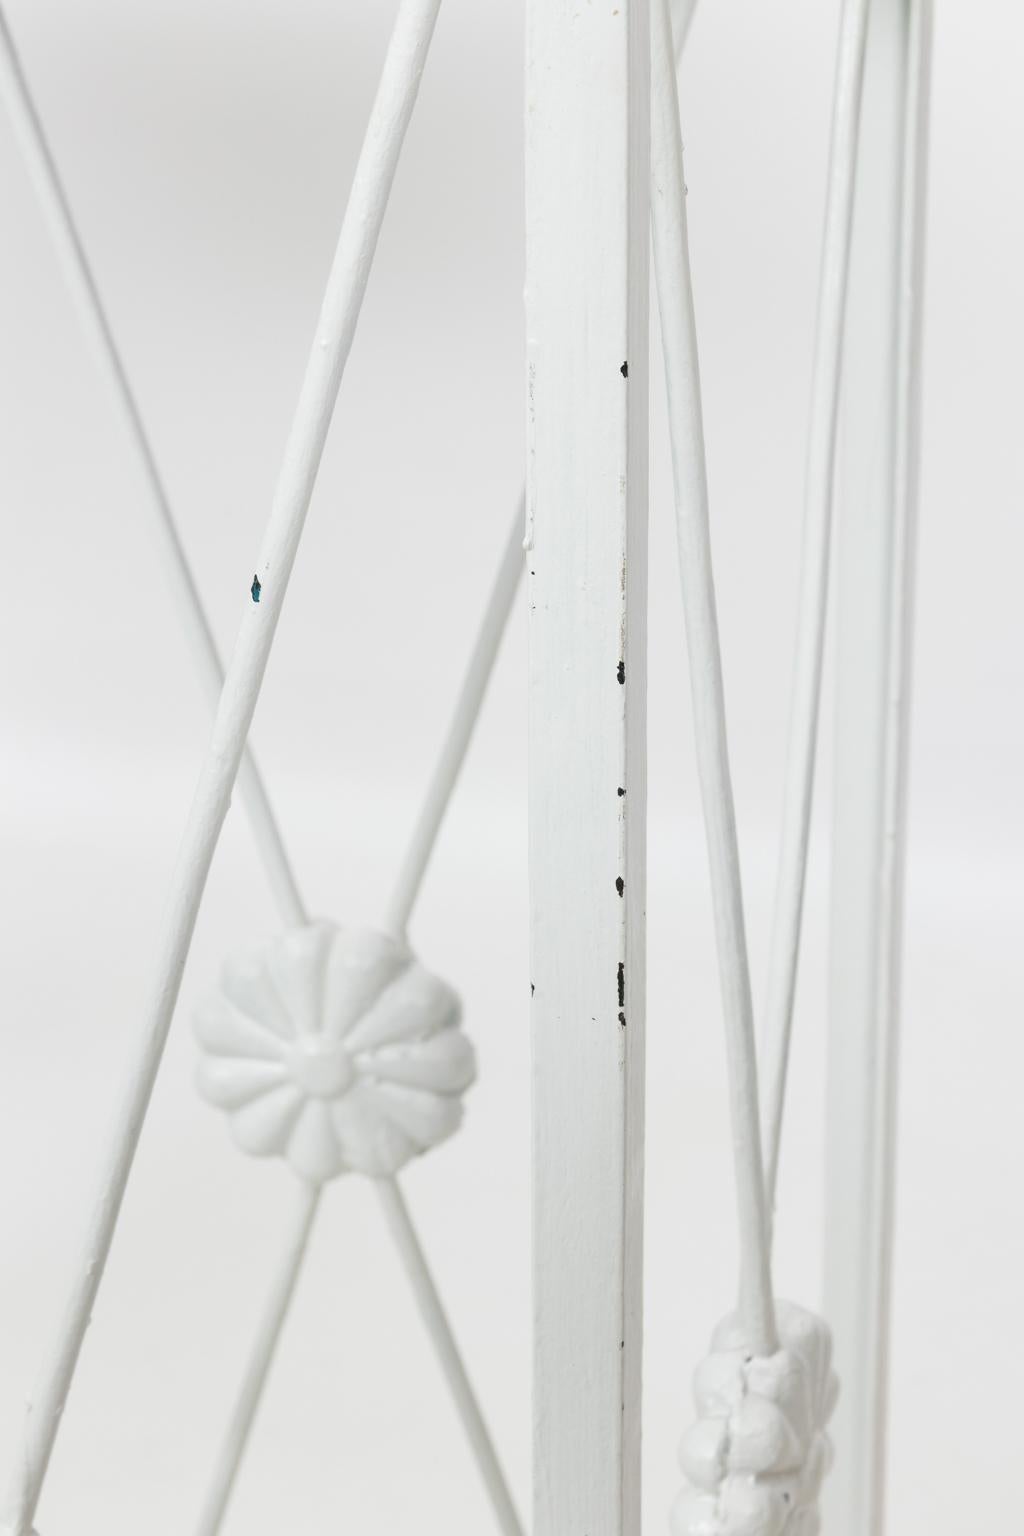 Pair of White Painted Iron Plant Stands, circa 1990 For Sale 7